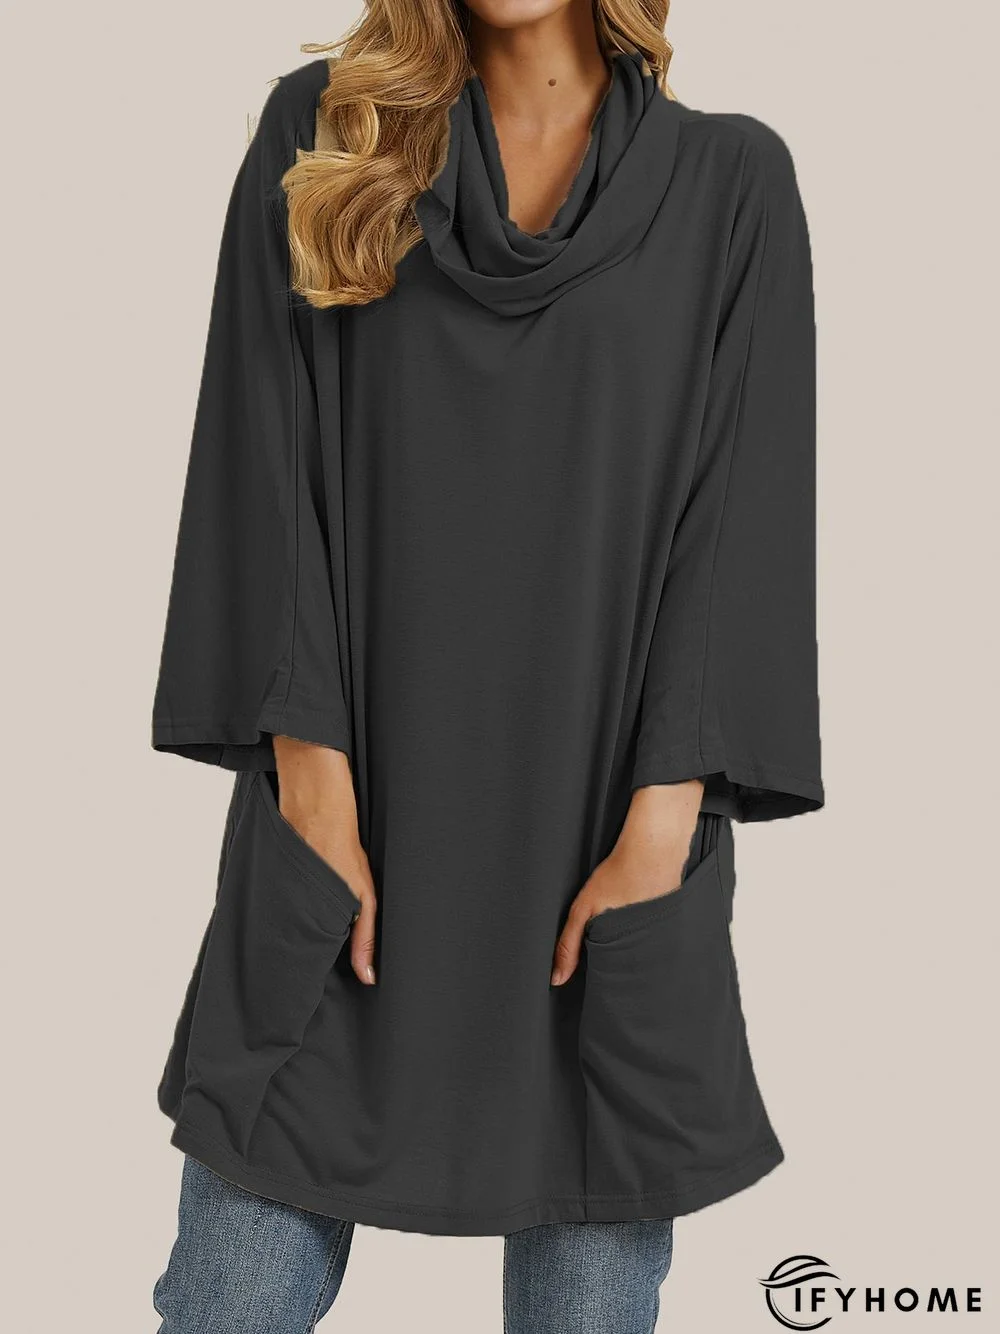 Casual Solid Cowl Neck Cotton-Blend Top | IFYHOME